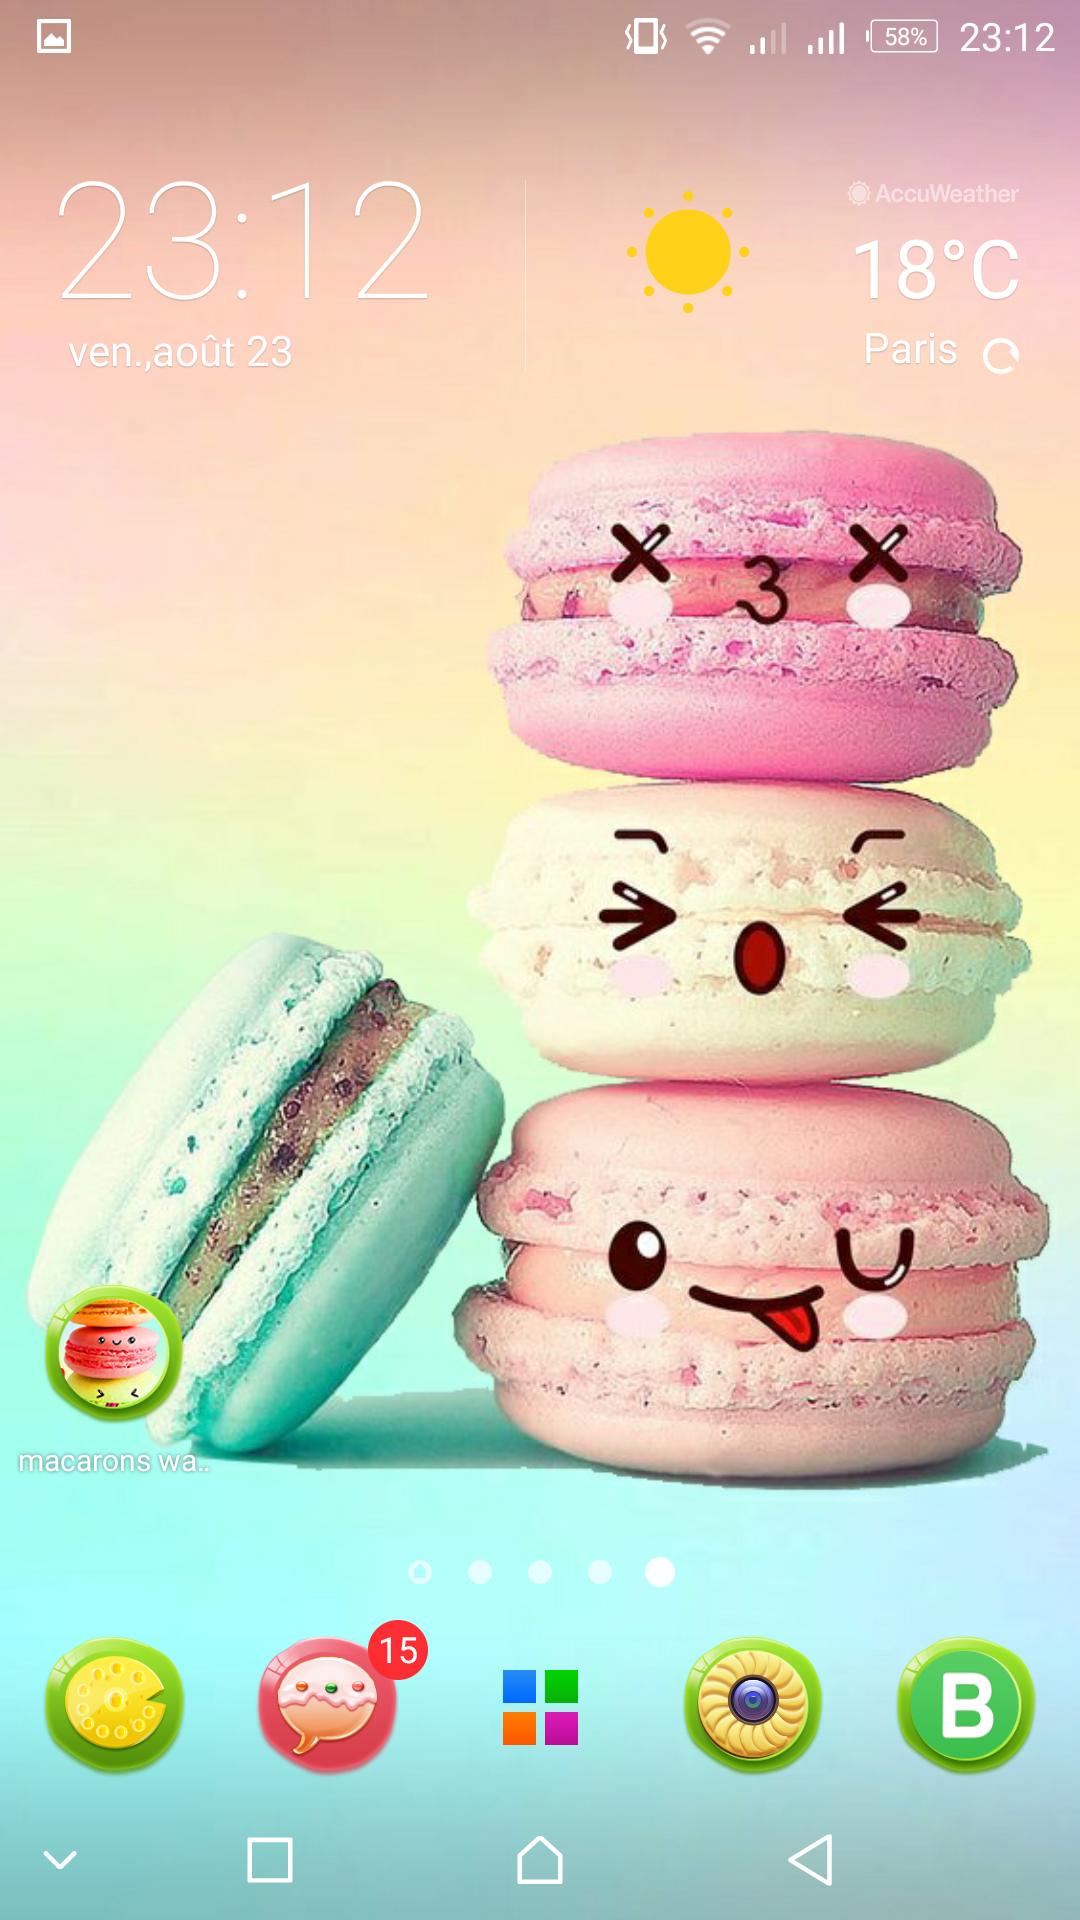 Macaron Wallpaper Cute Kawaii Background For Android Apk